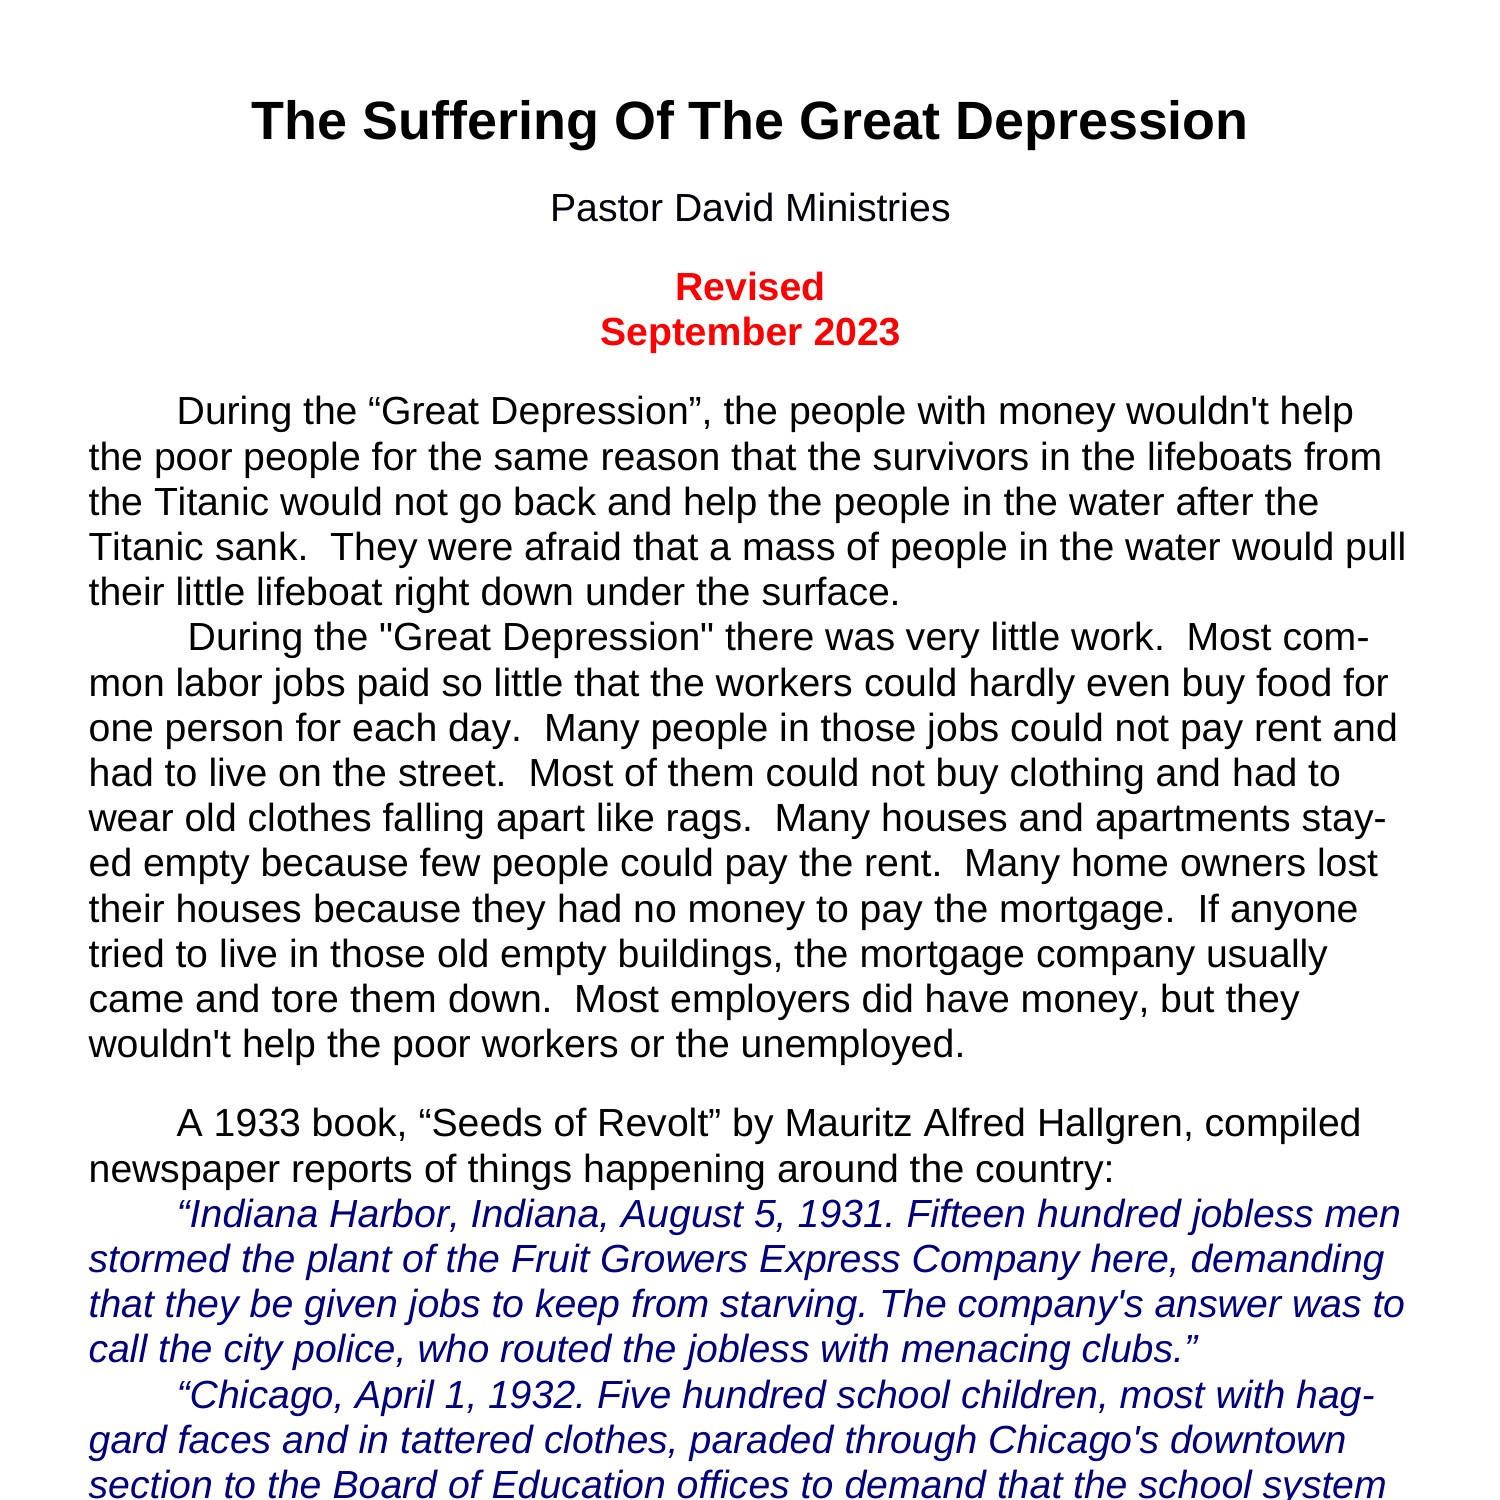 thesis about depression pdf